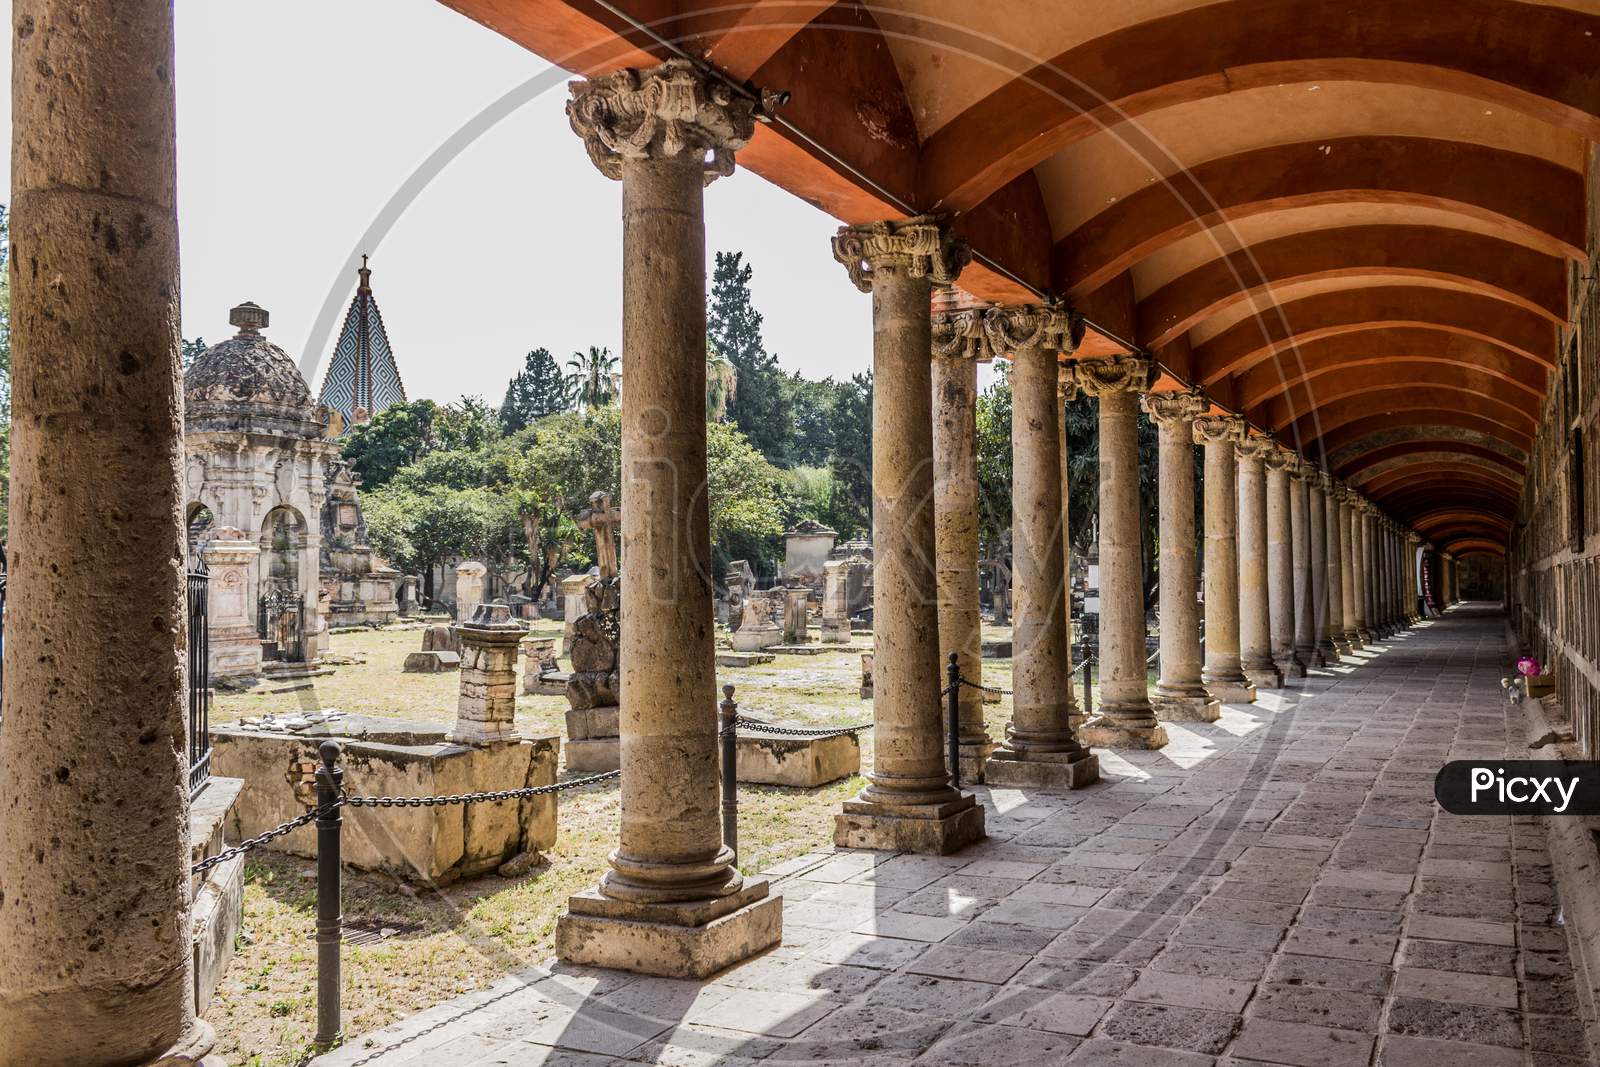 Amazing View Of A Side Aisle And Large And Small Tombs Of The Cemetery Of Belen In Guadalajara Jalisco Mexico, Copy Space, Travel, Halloween Concept